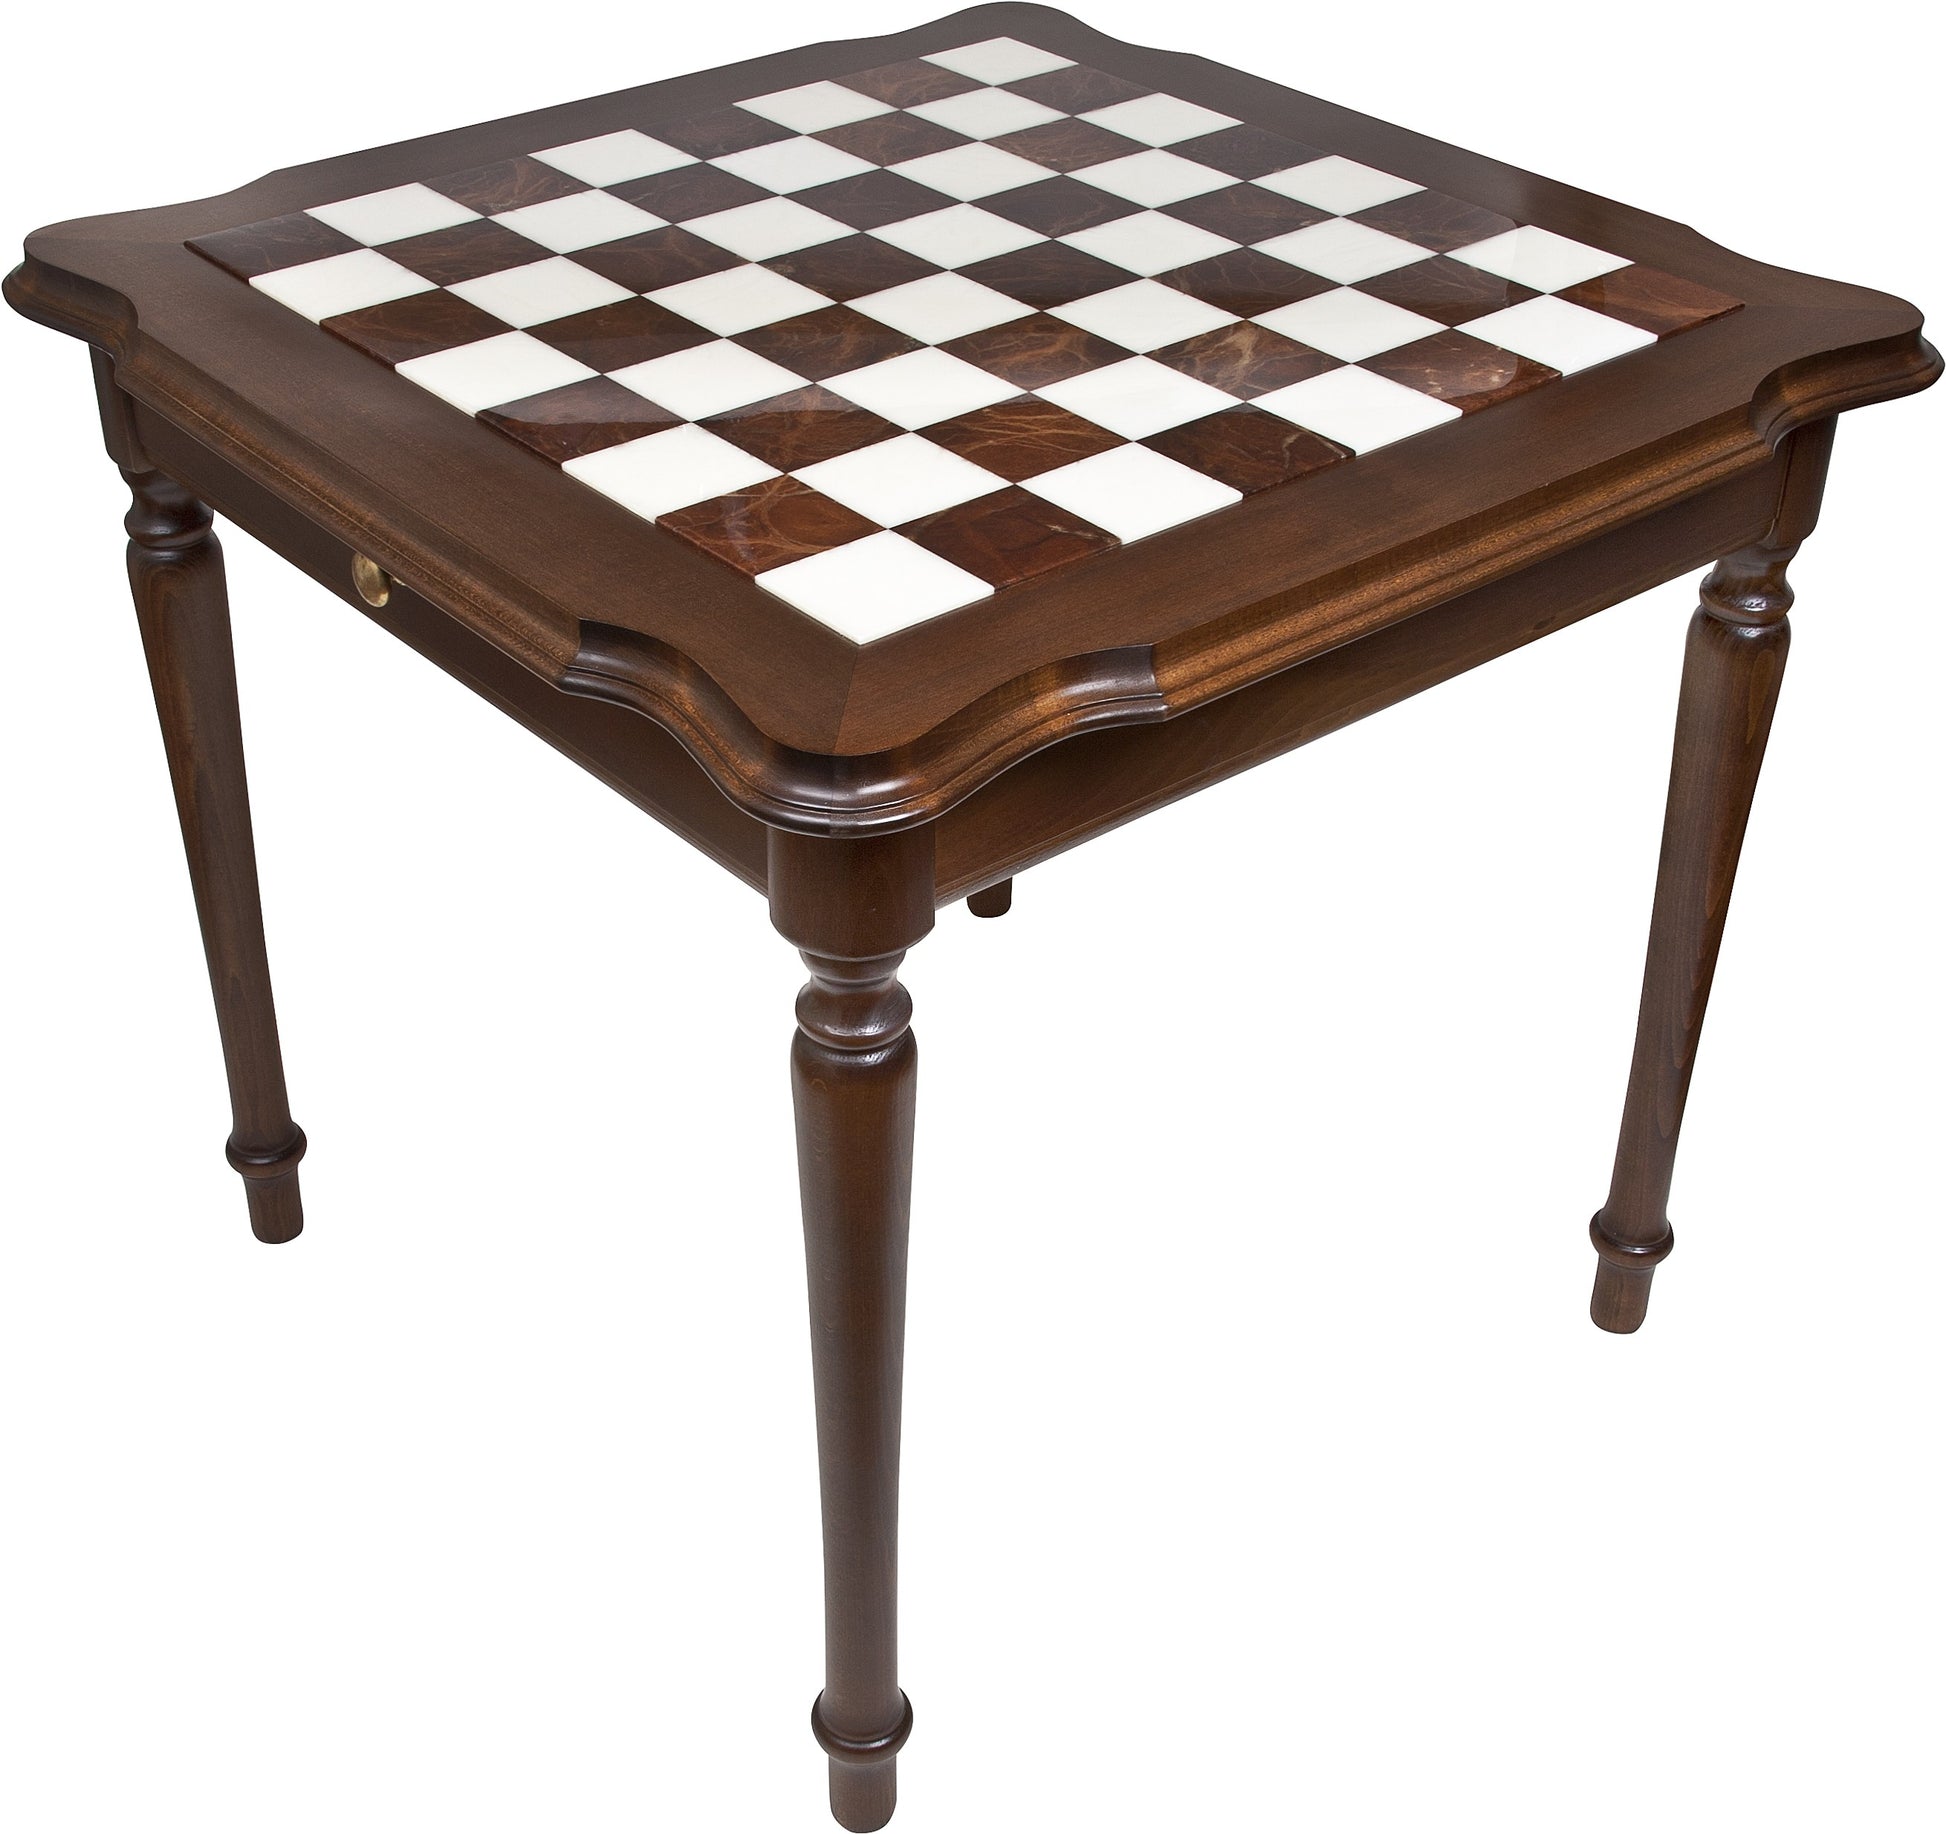 33 inch Marble Kings Chess Table from Italy (3 1/8 Inch Squares)